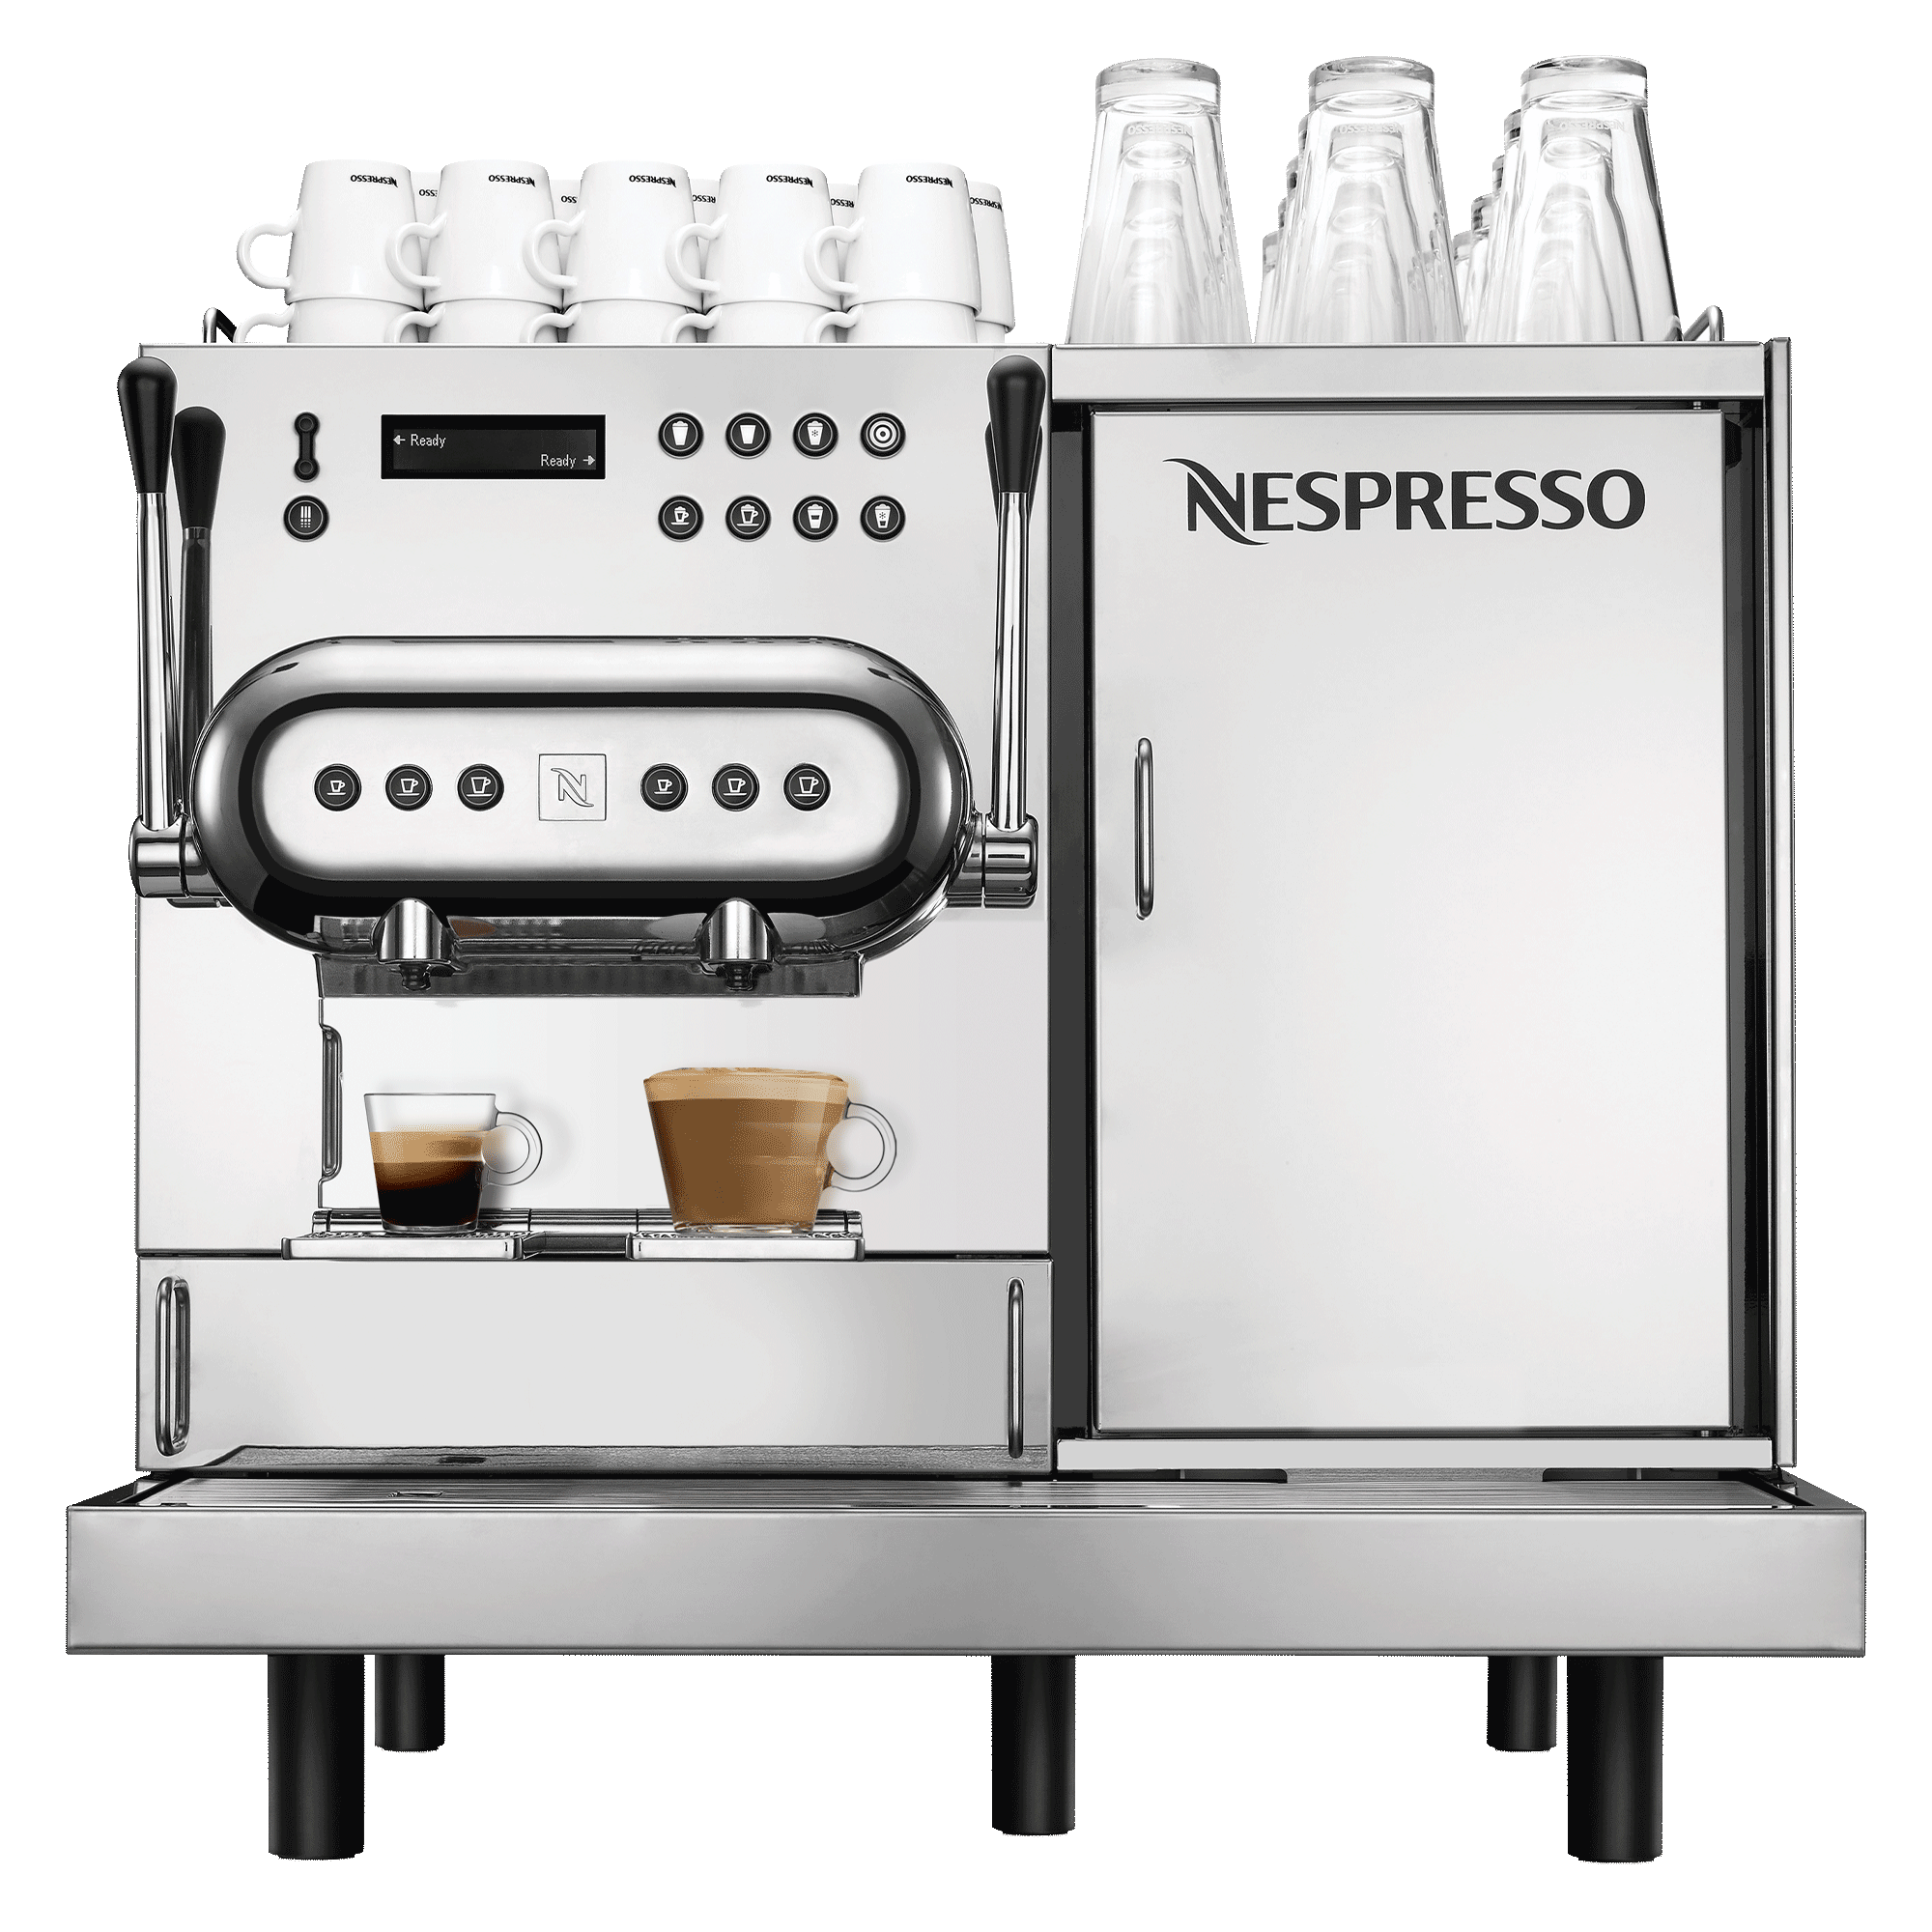 Nespresso Corporate Machines | vlr.eng.br